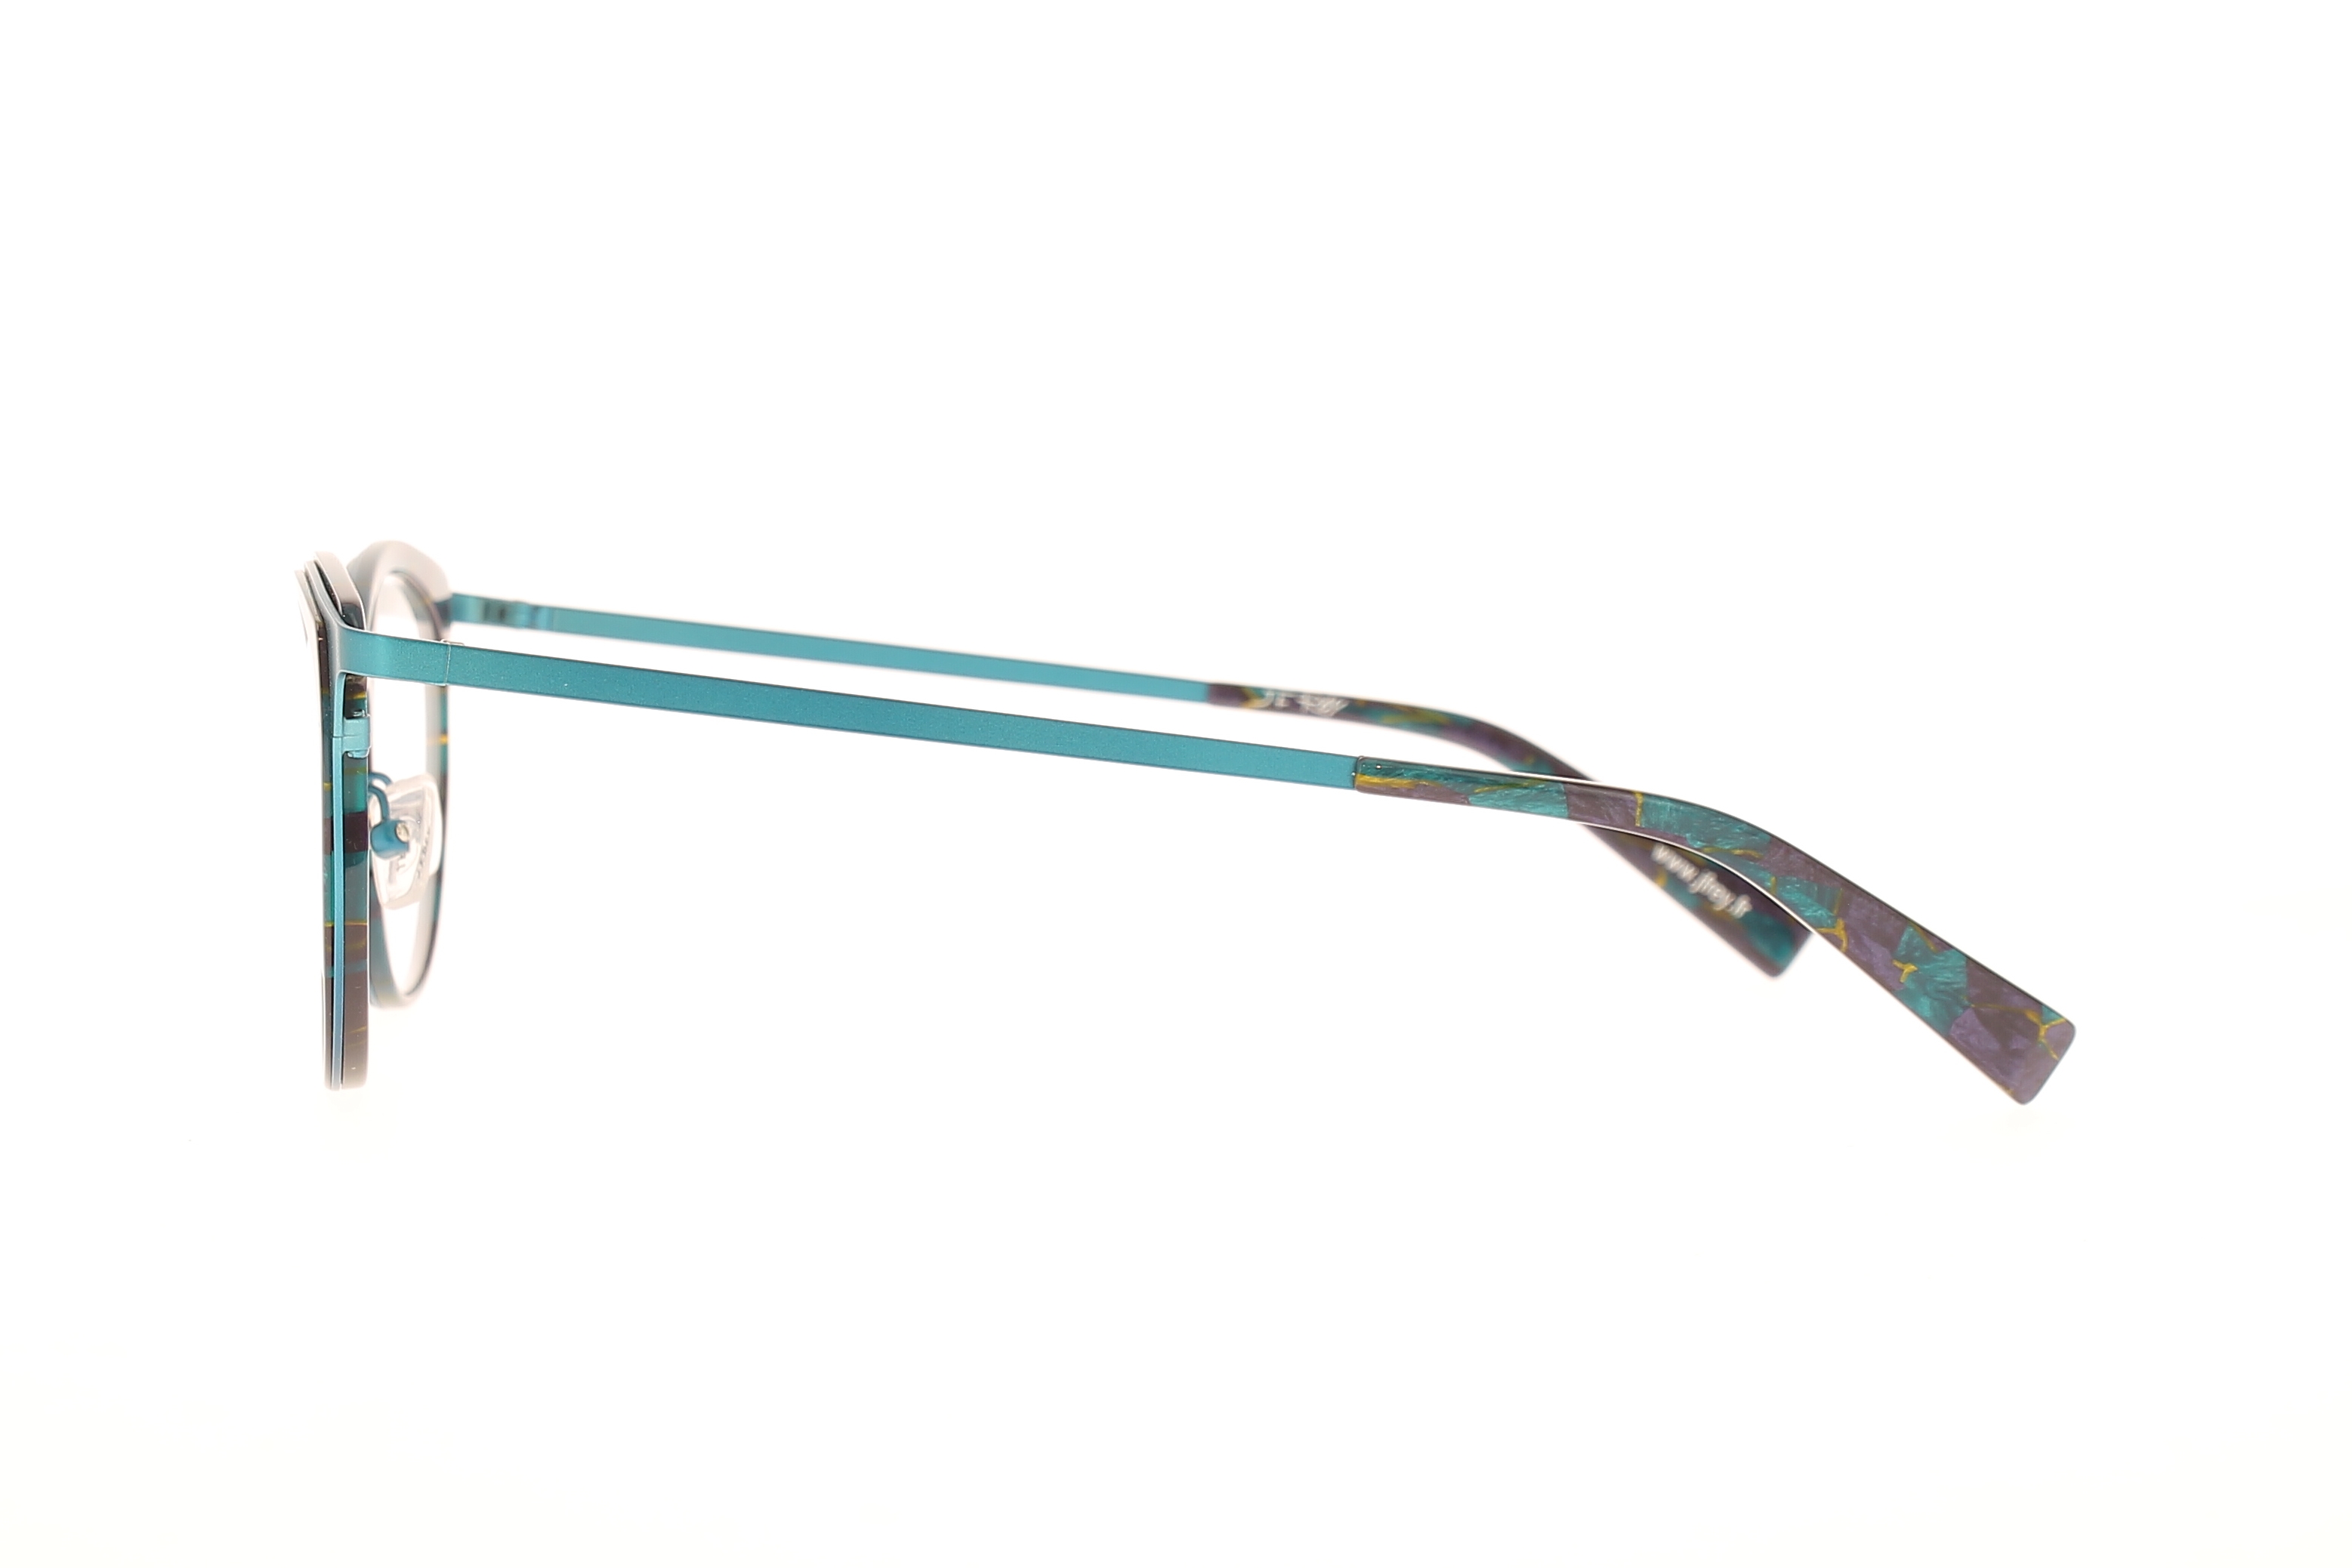 Glasses Jf-rey Jf2822, turquoise colour - Doyle